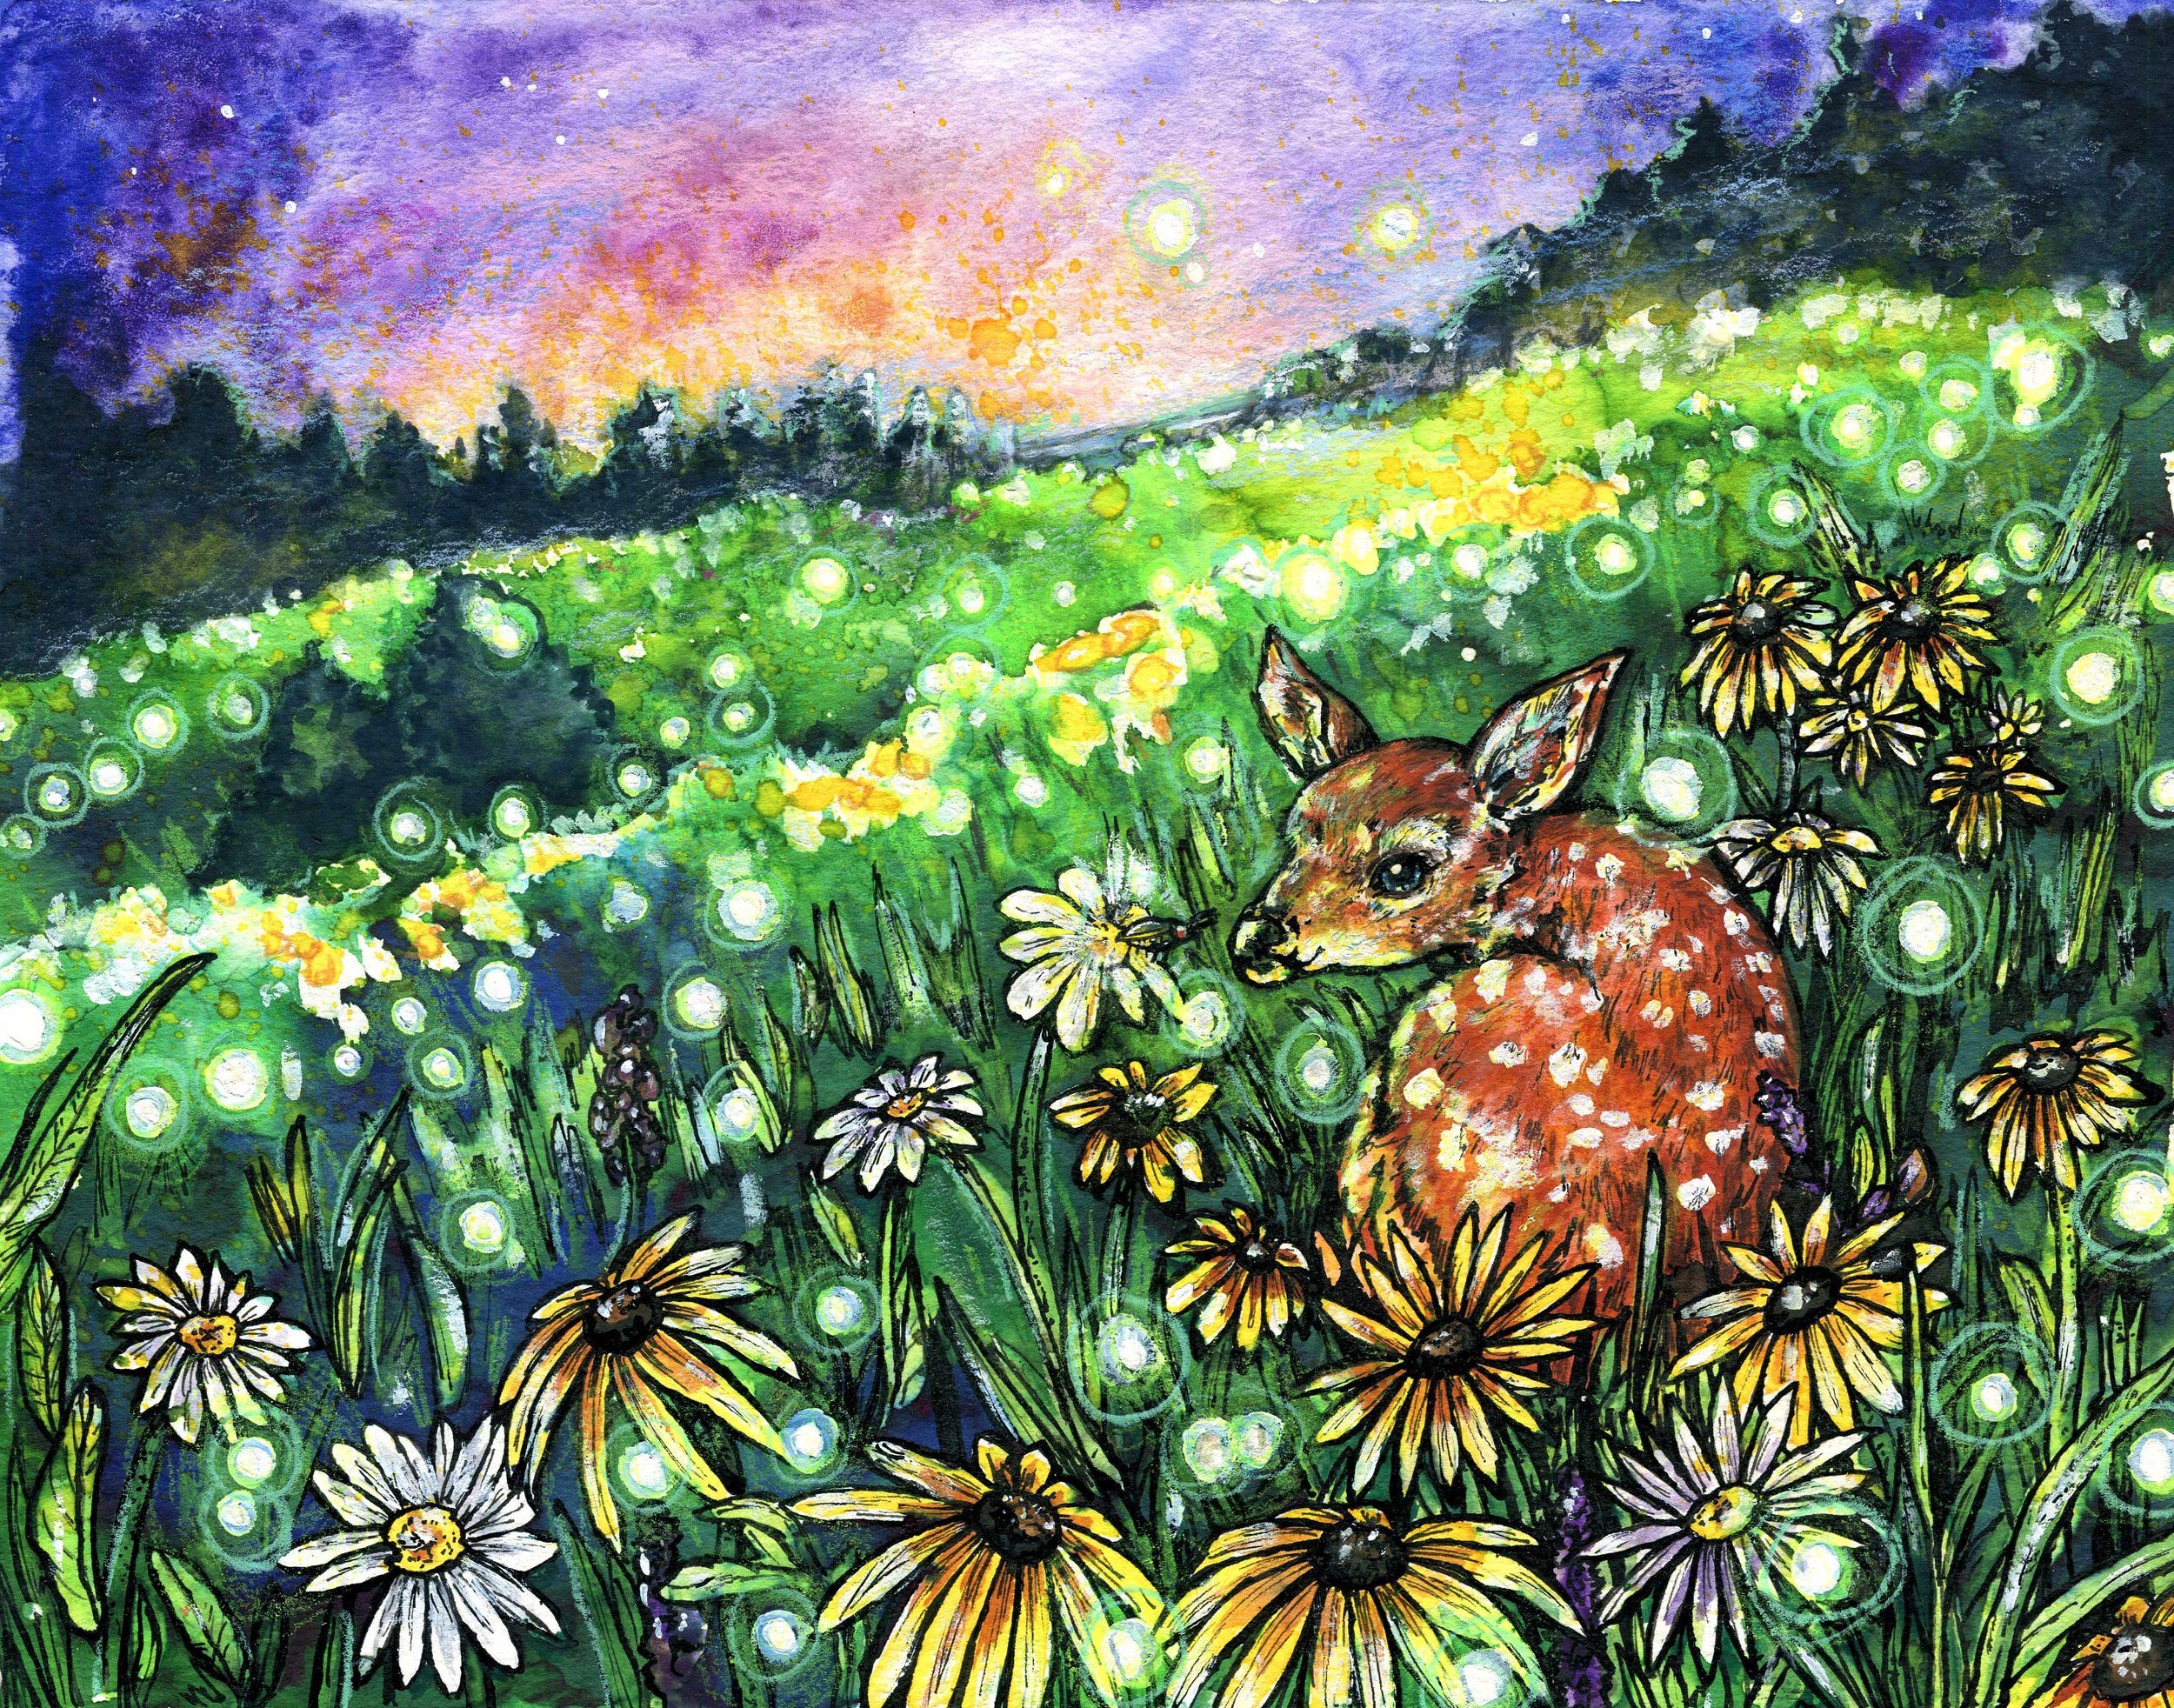 Fawn, Flowers, and Fireflies